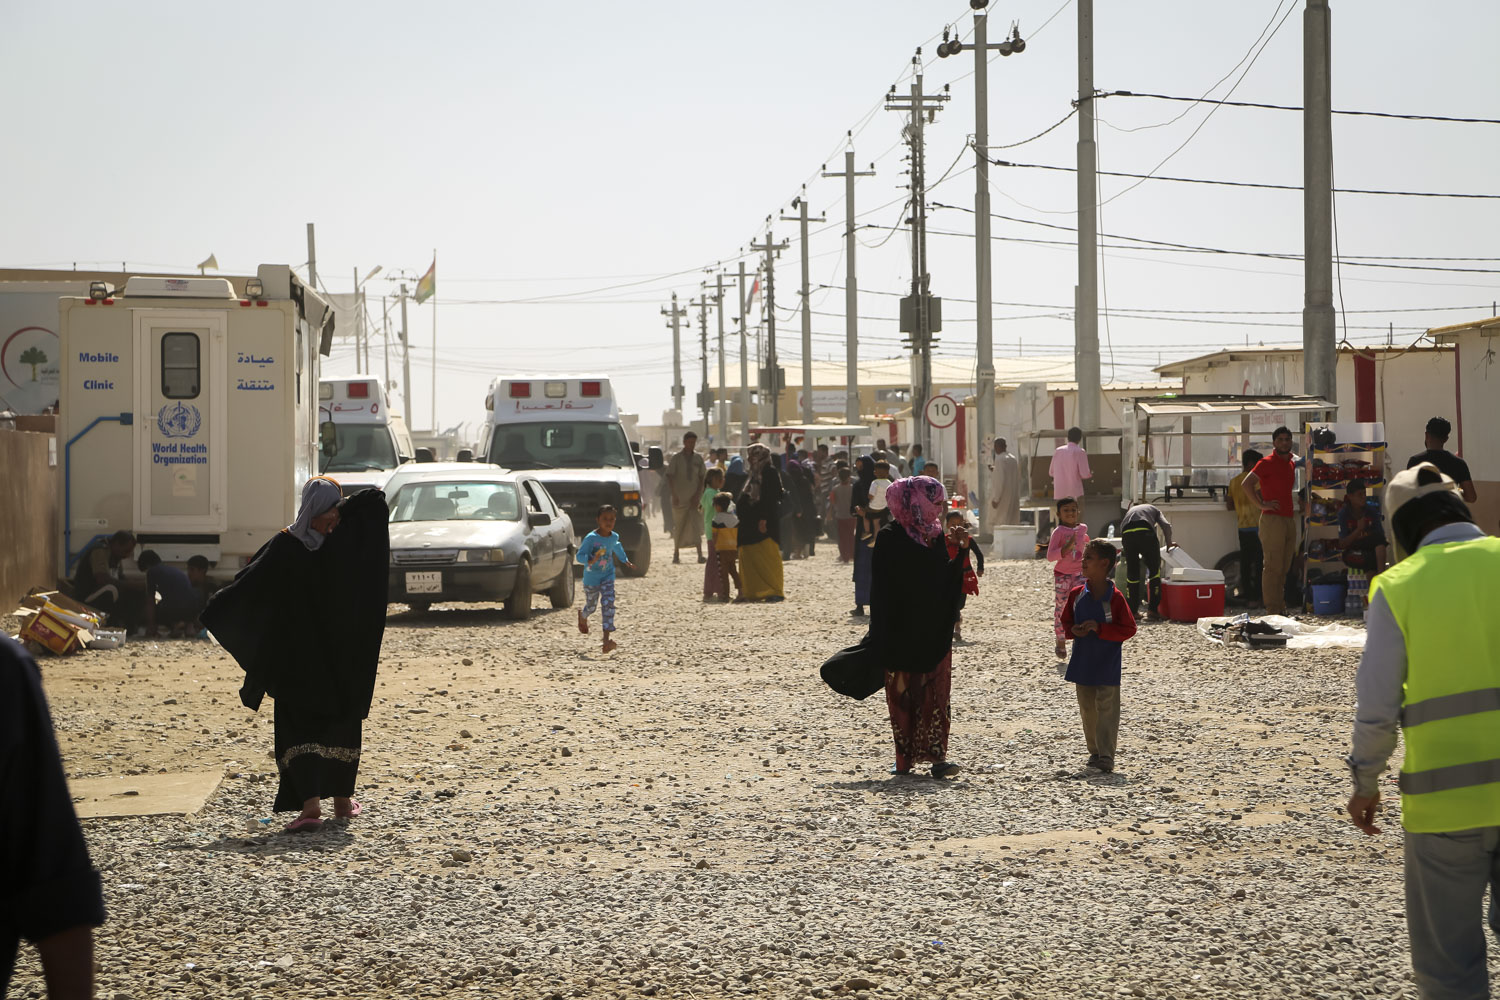 Get the latest humanitarian news on the Mosul offensive. Up to 1 million civilians could flee Iraq’s second largest city as the siege to overthrow extremists escalates, creating urgent humanitarian needs.